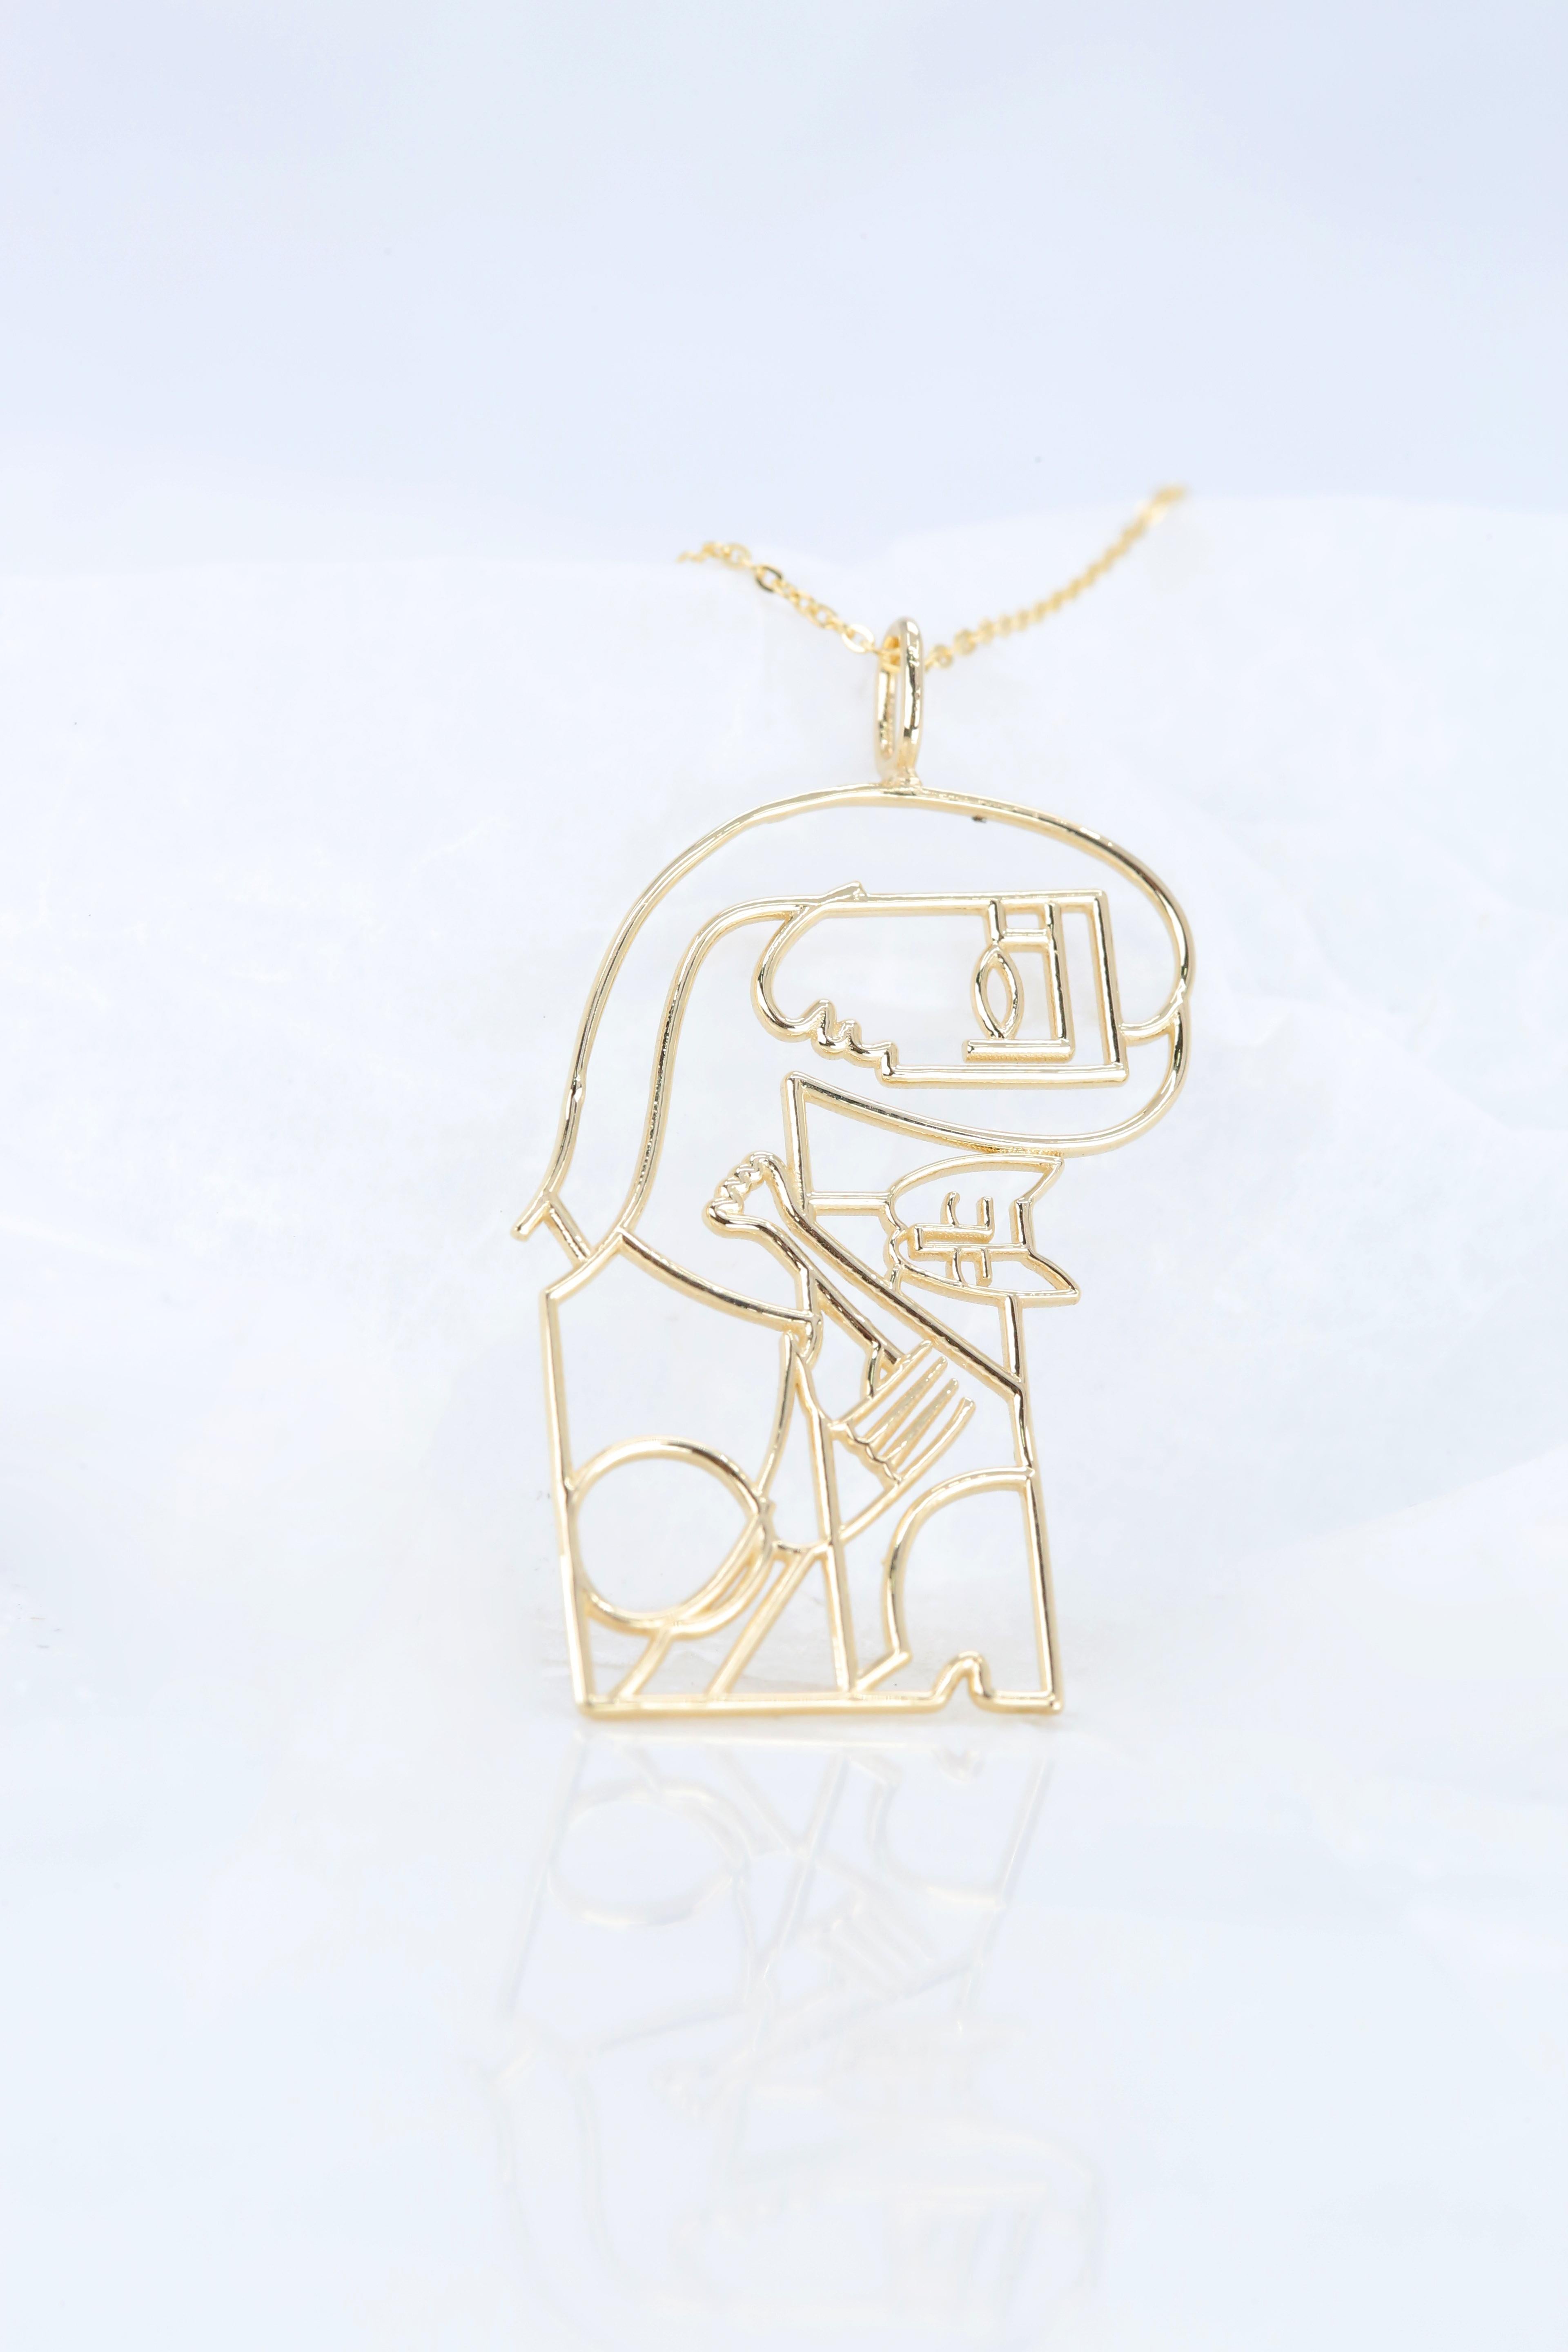 14K Gold Woman with a Cat Pendant Necklace, Inspired by Jiri Petr For Sale 1